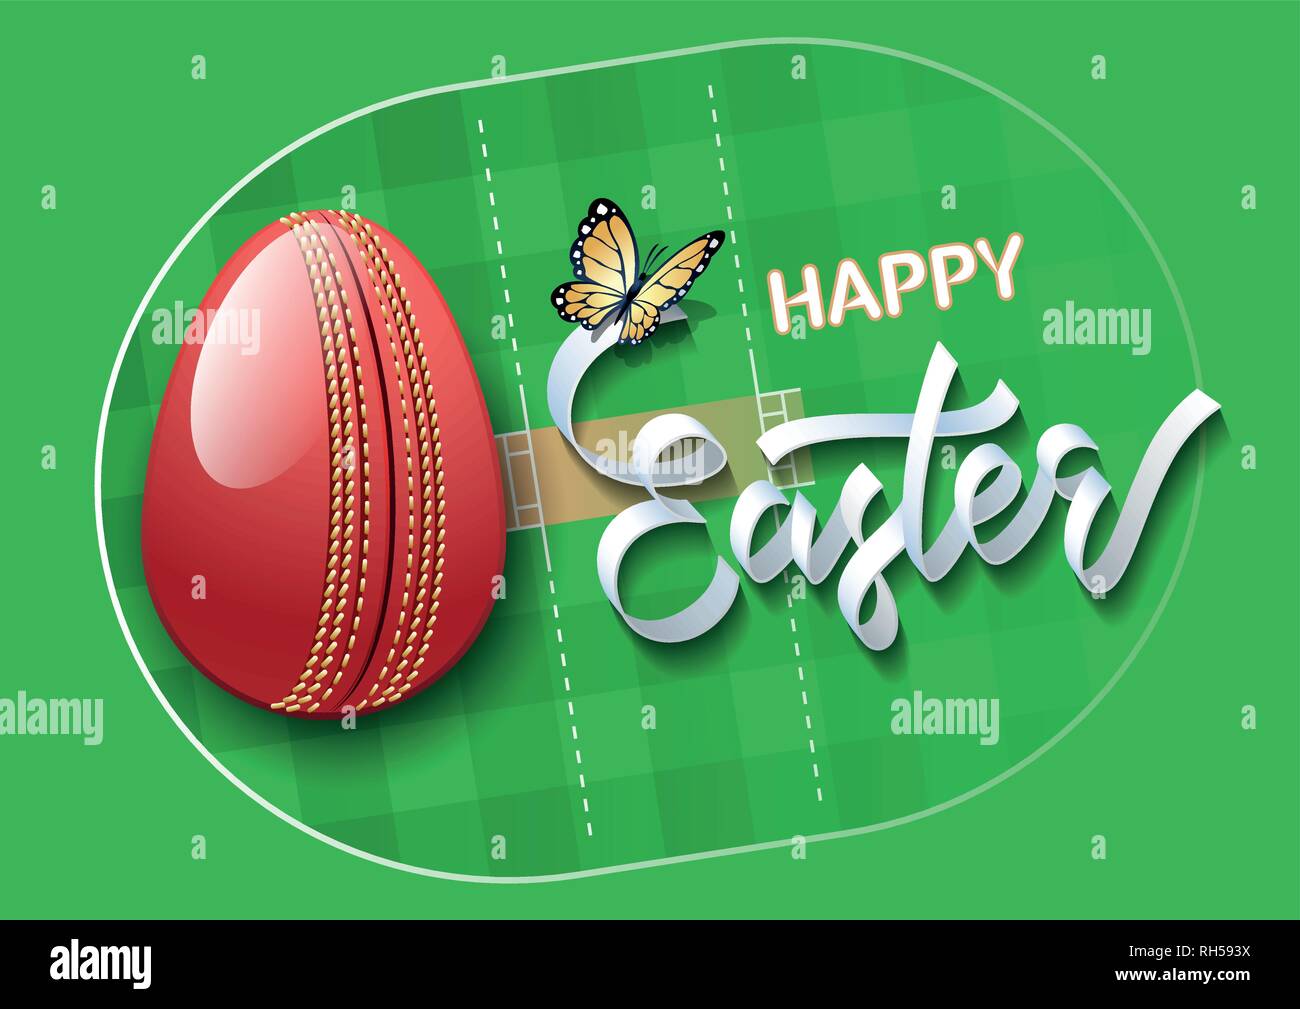 Happy Easter. Easter egg in the form of a cricket ball on a cricket field background. Vector illustration. Stock Vector